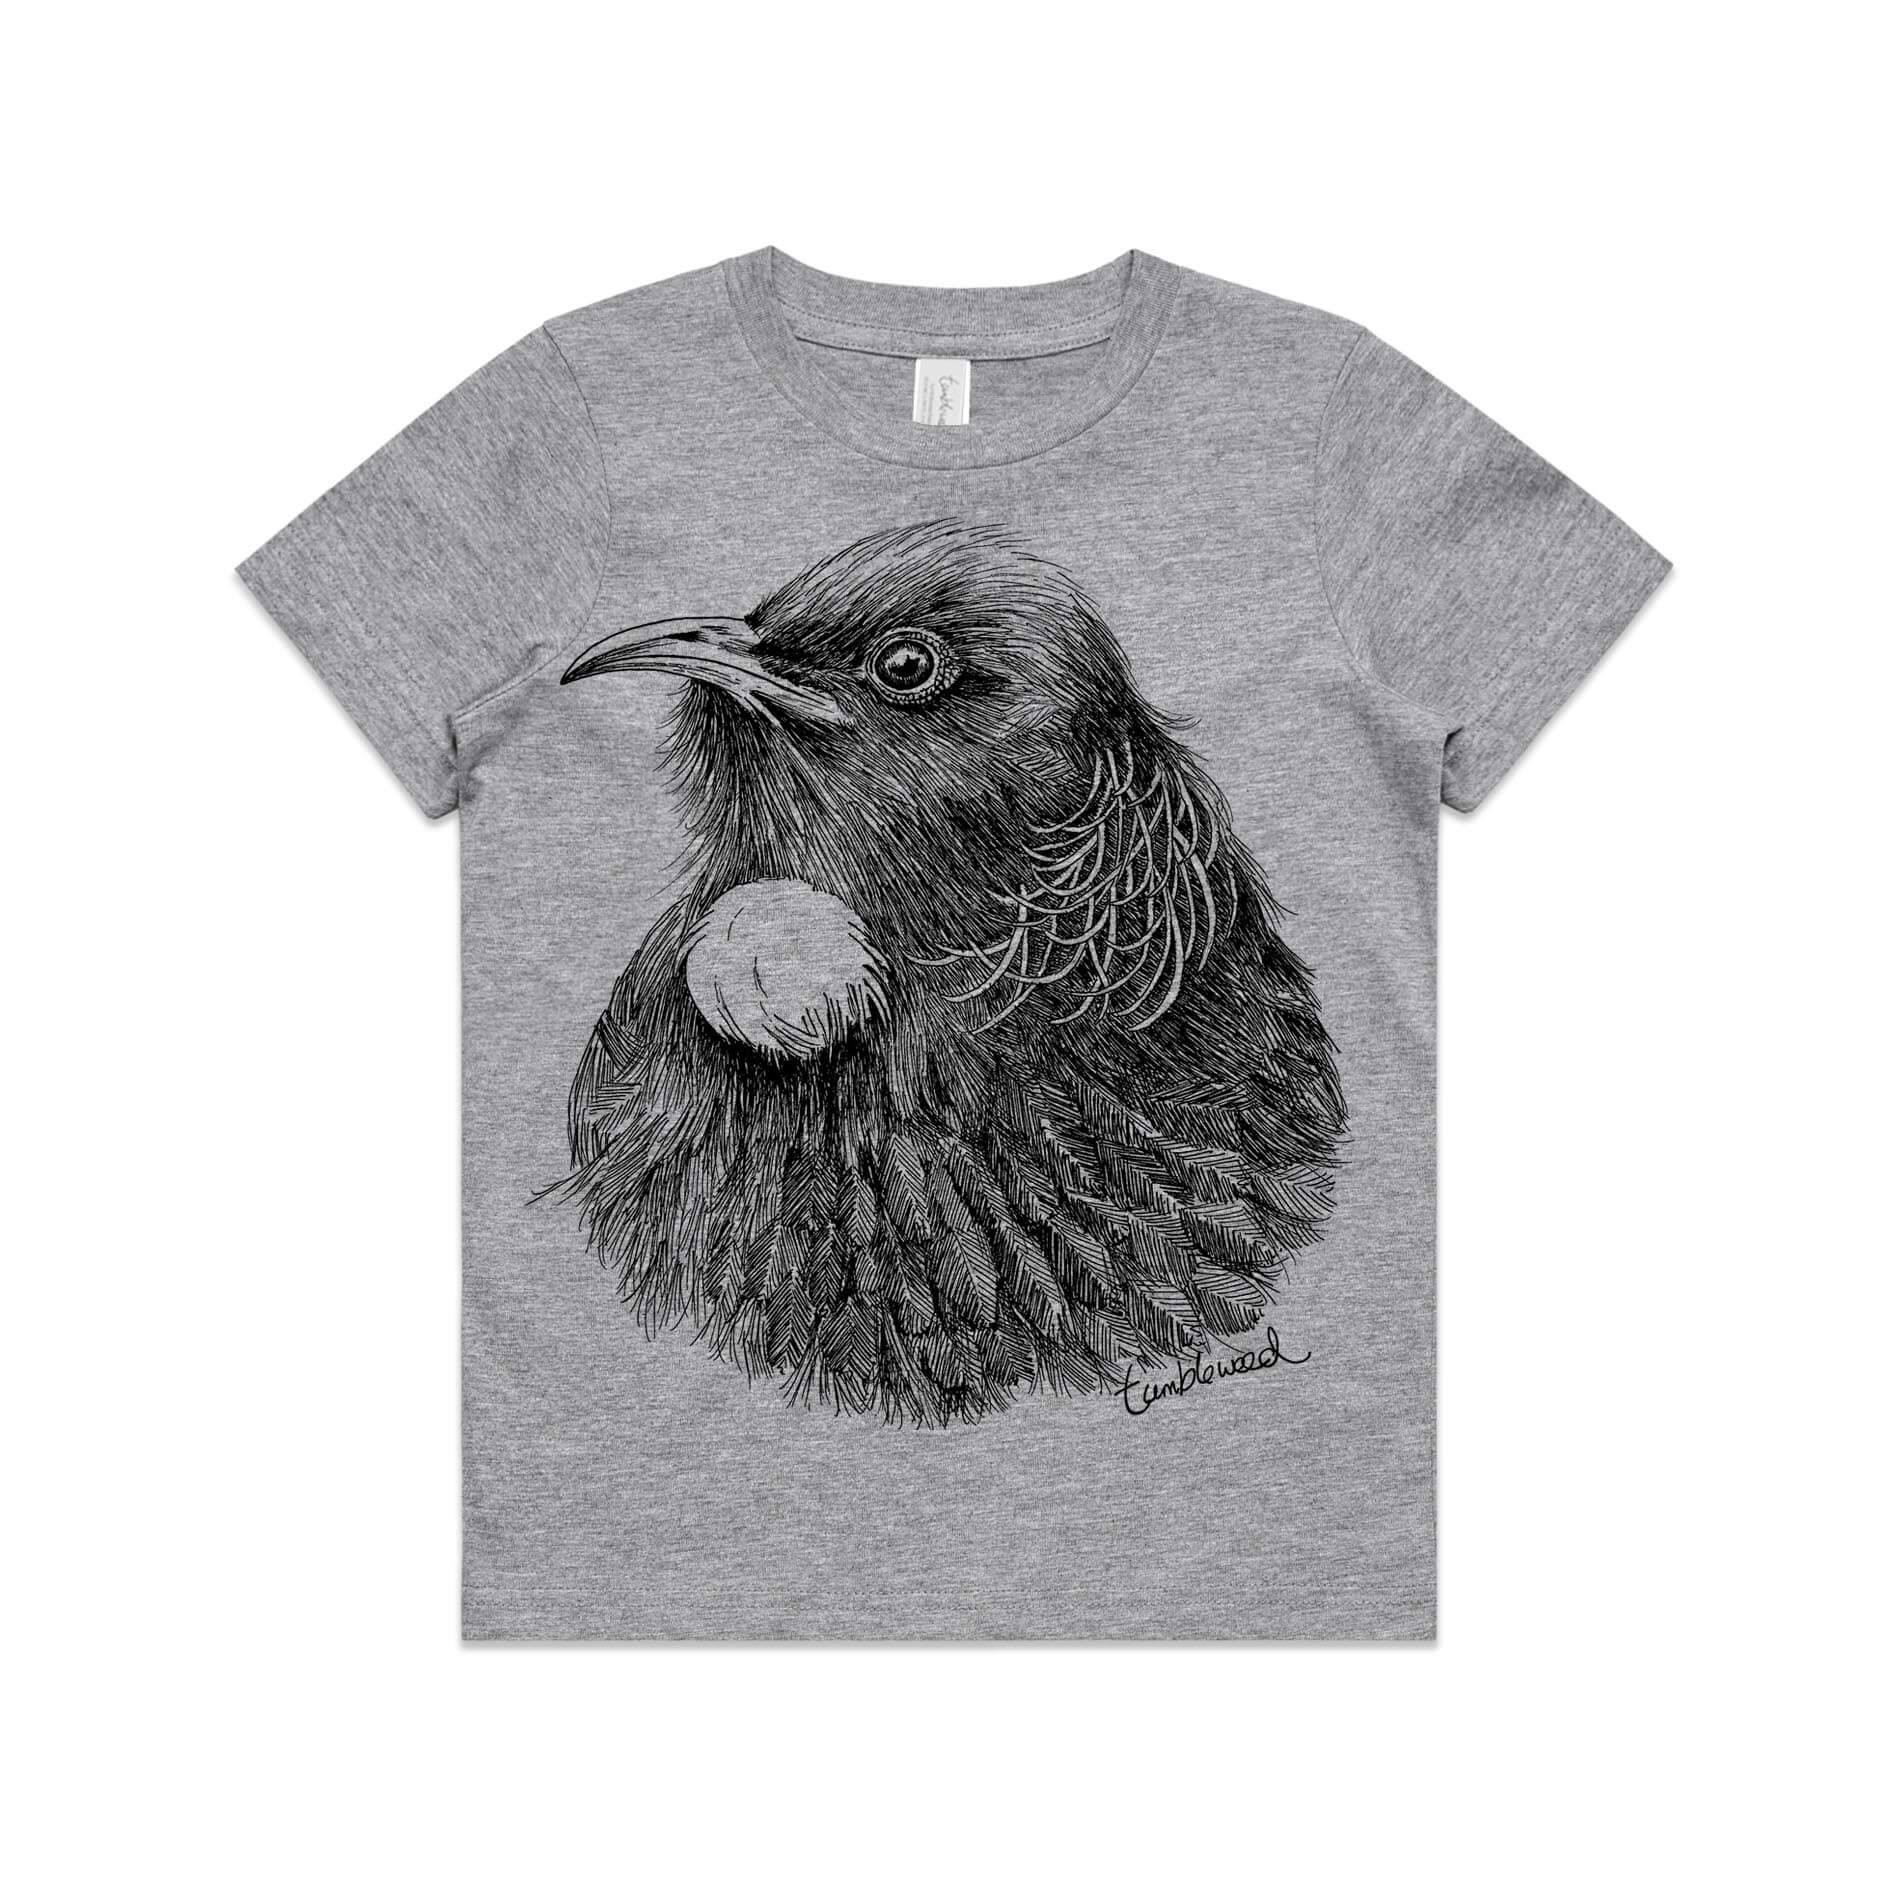 Grey Marle, cotton kids' t-shirt with screen printed tui design.